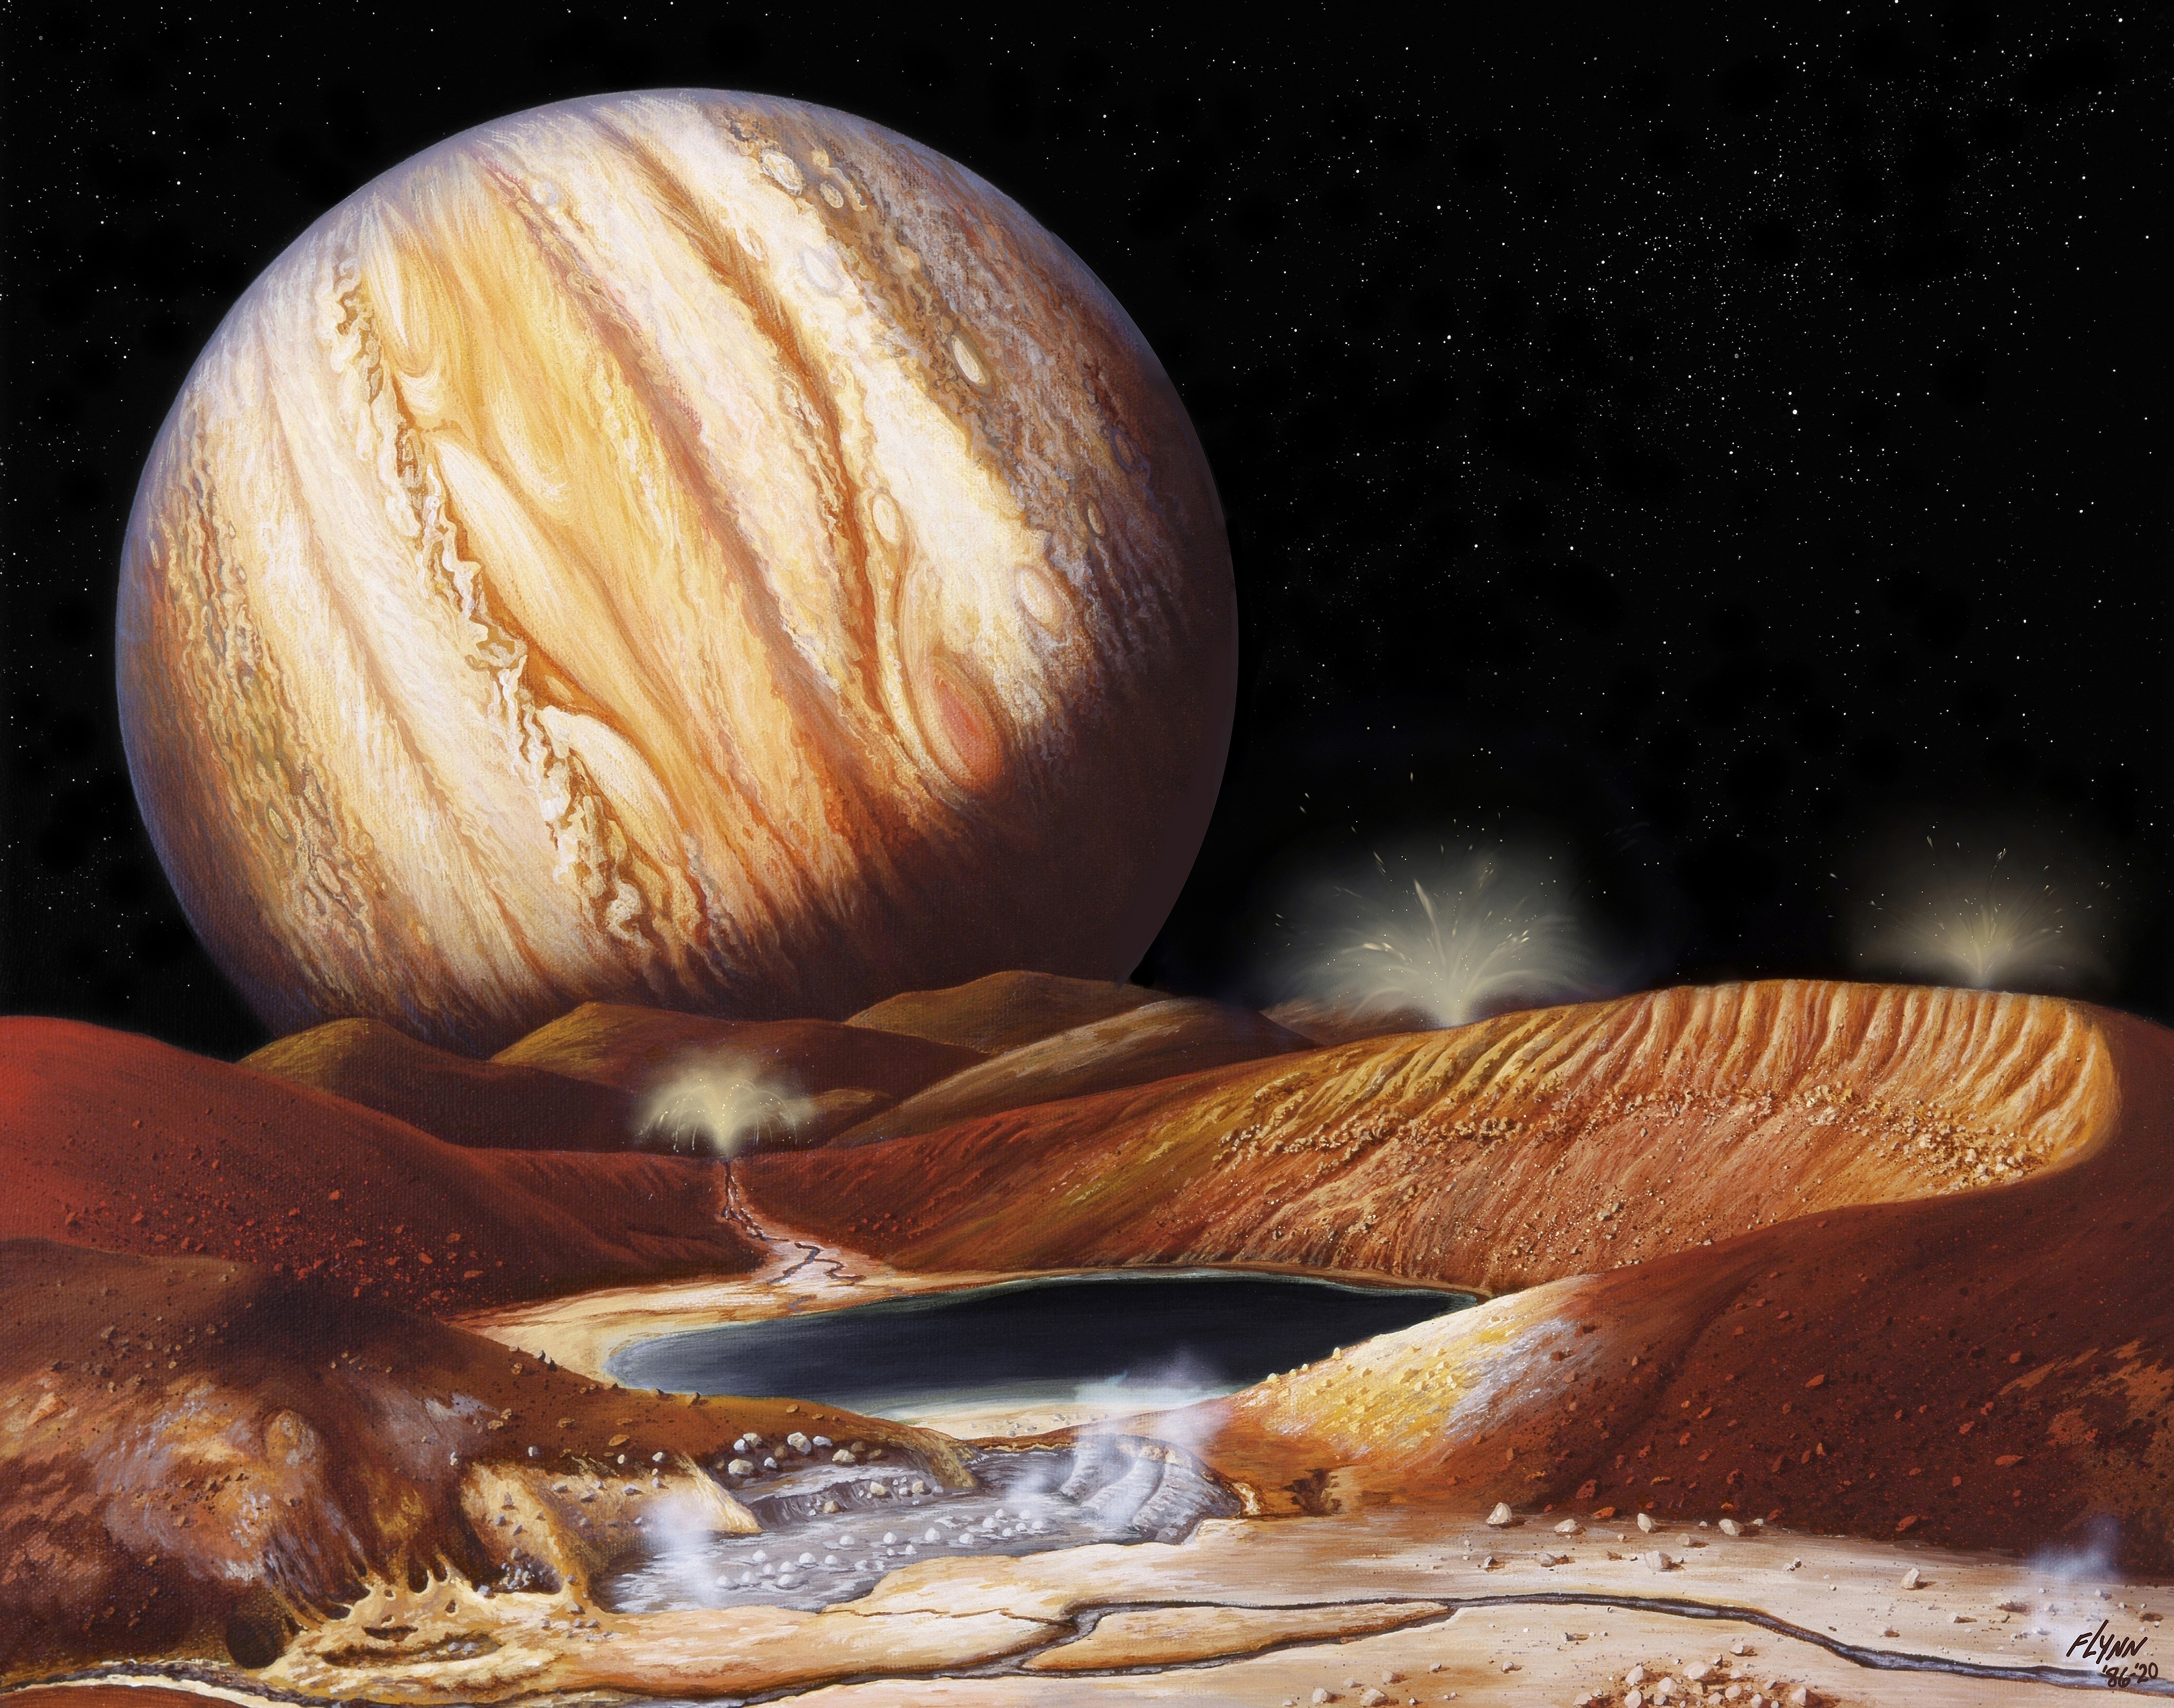 A painting of Jupiter's volcanic moon Io with erupting geysers near a molten sulphur lake and Jupiter in the sky.